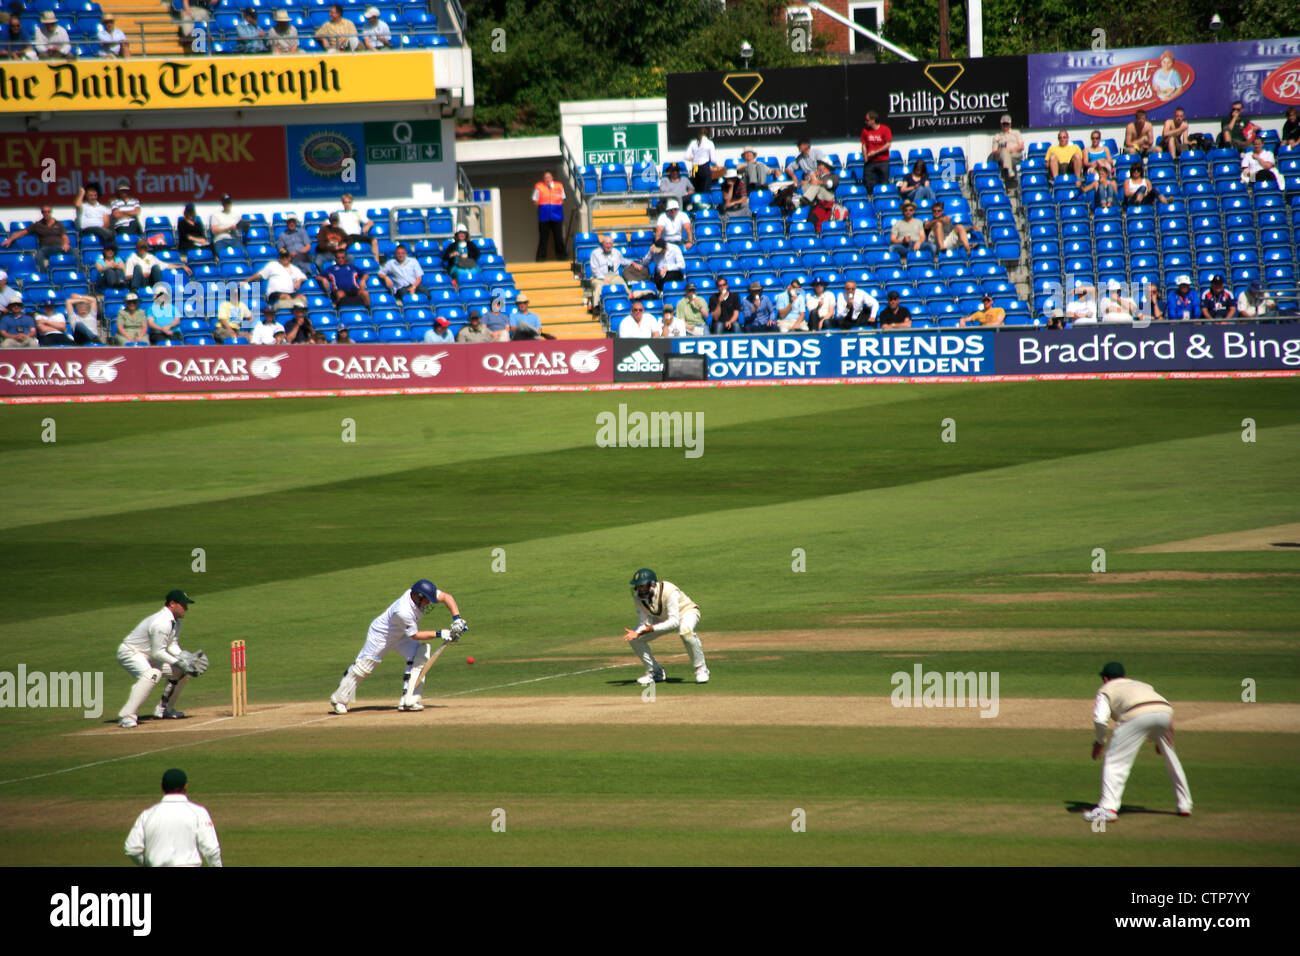 Cricket Test match between England and South Africa played at Headingly Cricket Ground, Yorkshire, England, UK 21 07 2008 Stock Photo